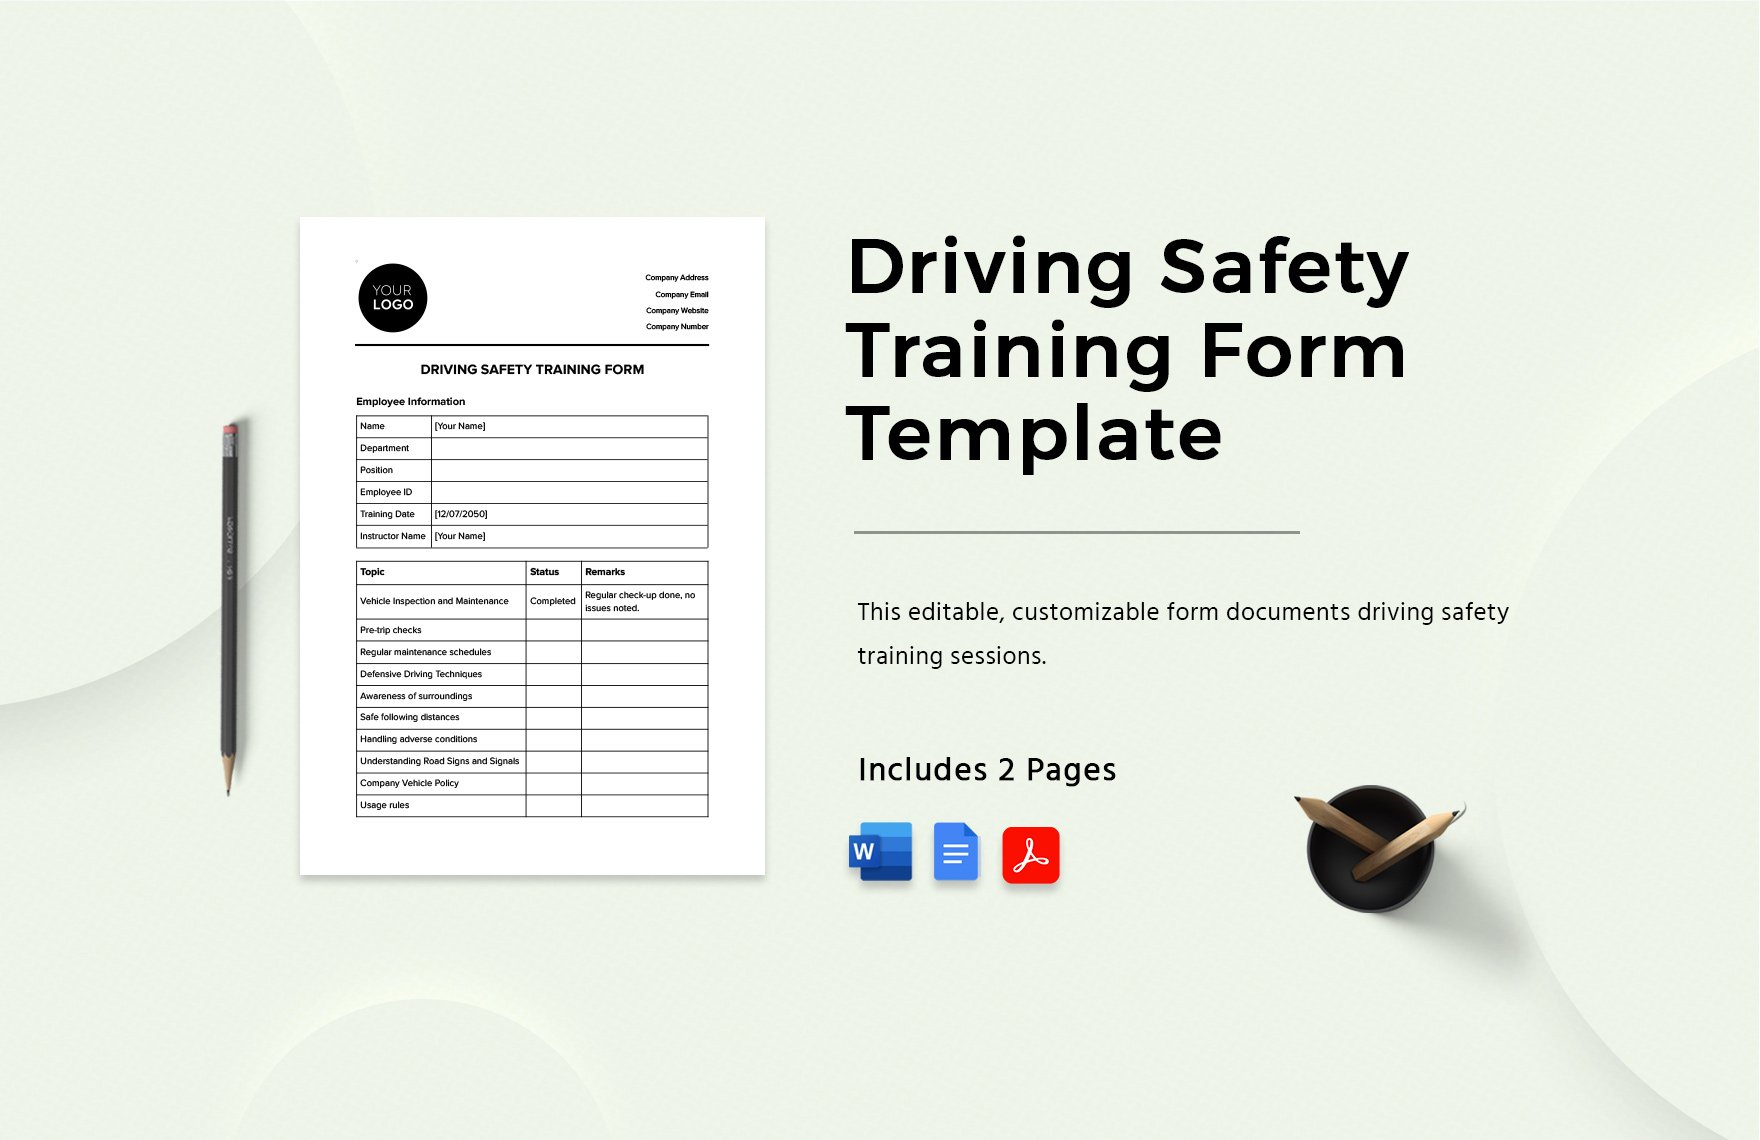 Driving Safety Training Form Template in Word, Google Docs, PDF